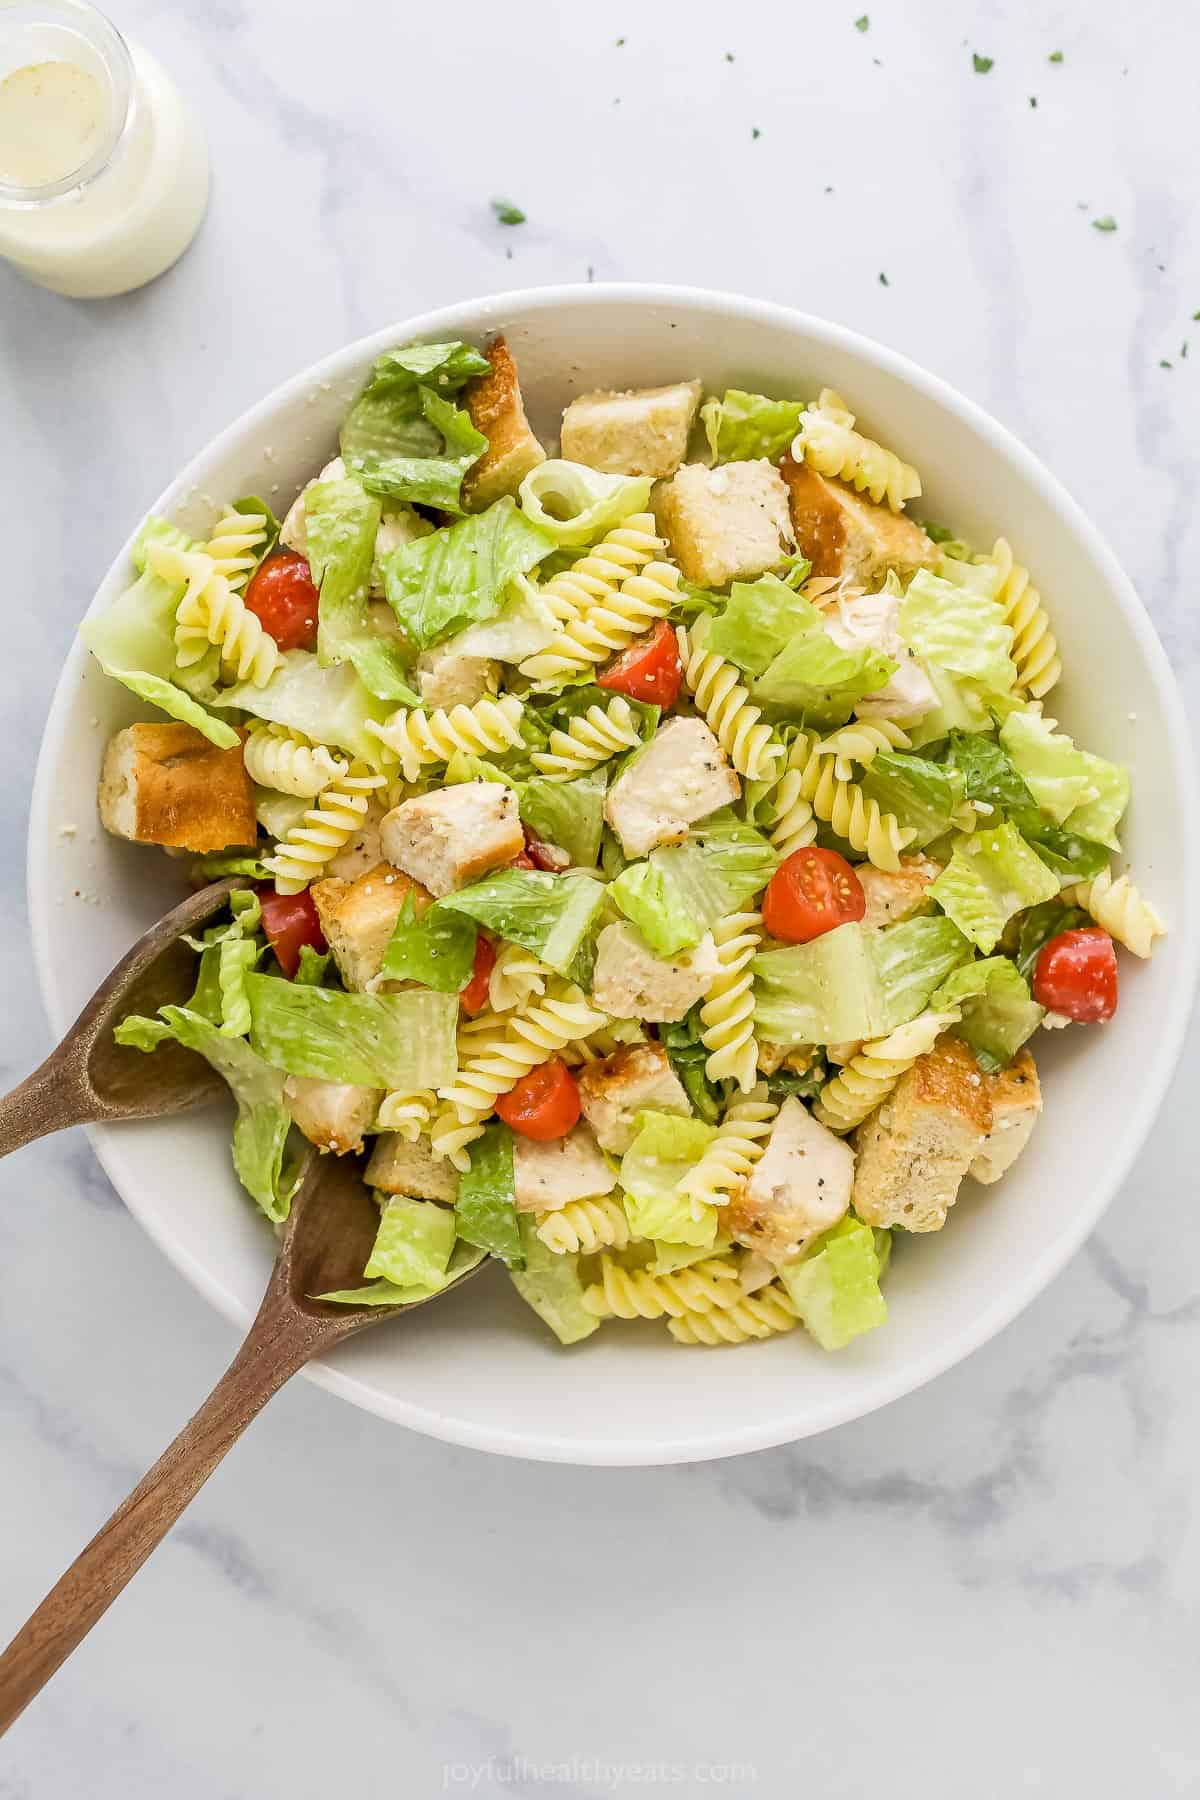 Two wooden spoons being used to toss a salad with caesar dressing